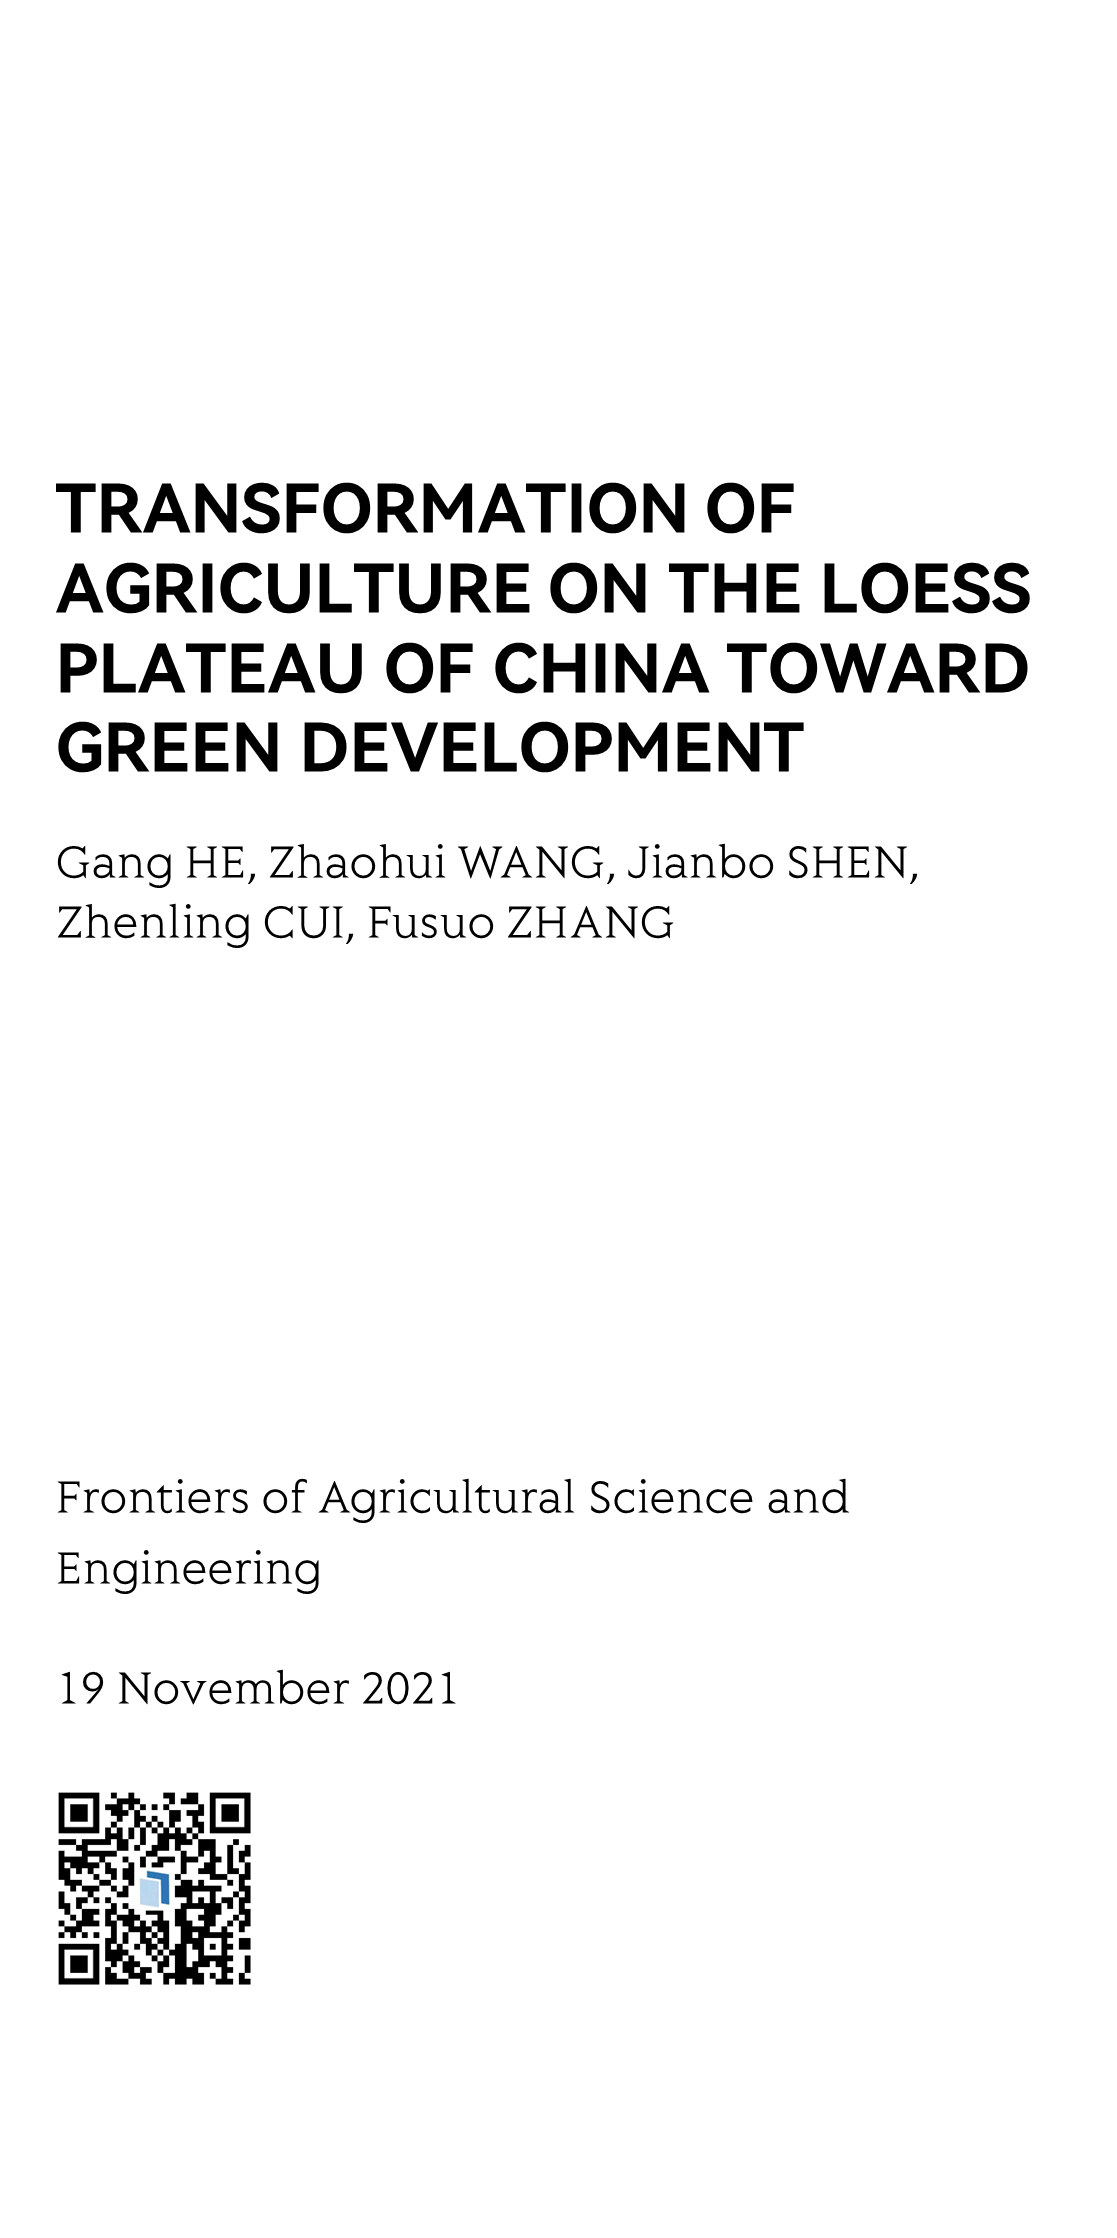 Transformation of agriculture on the Loess Plateau of China toward green development_1